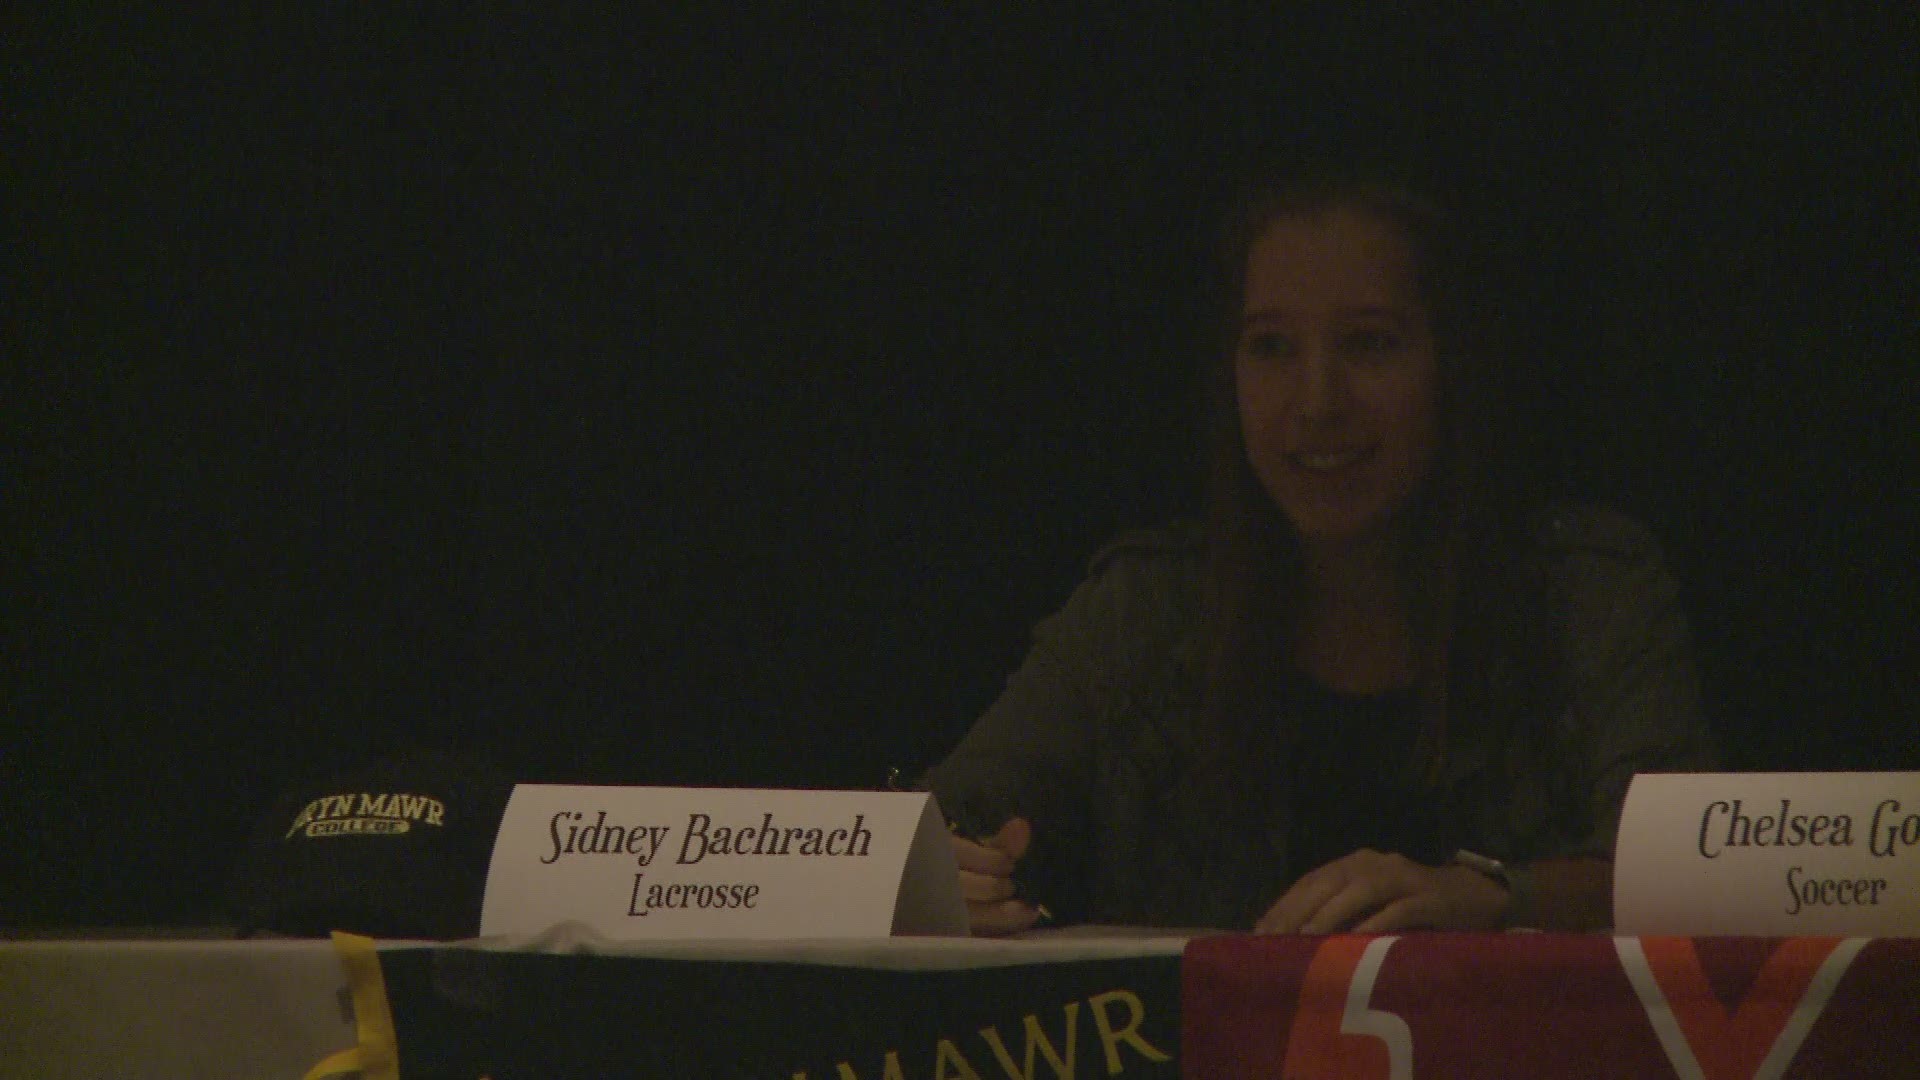 Sidney Bachrach signed to play lacrosse at Bryn Mawr